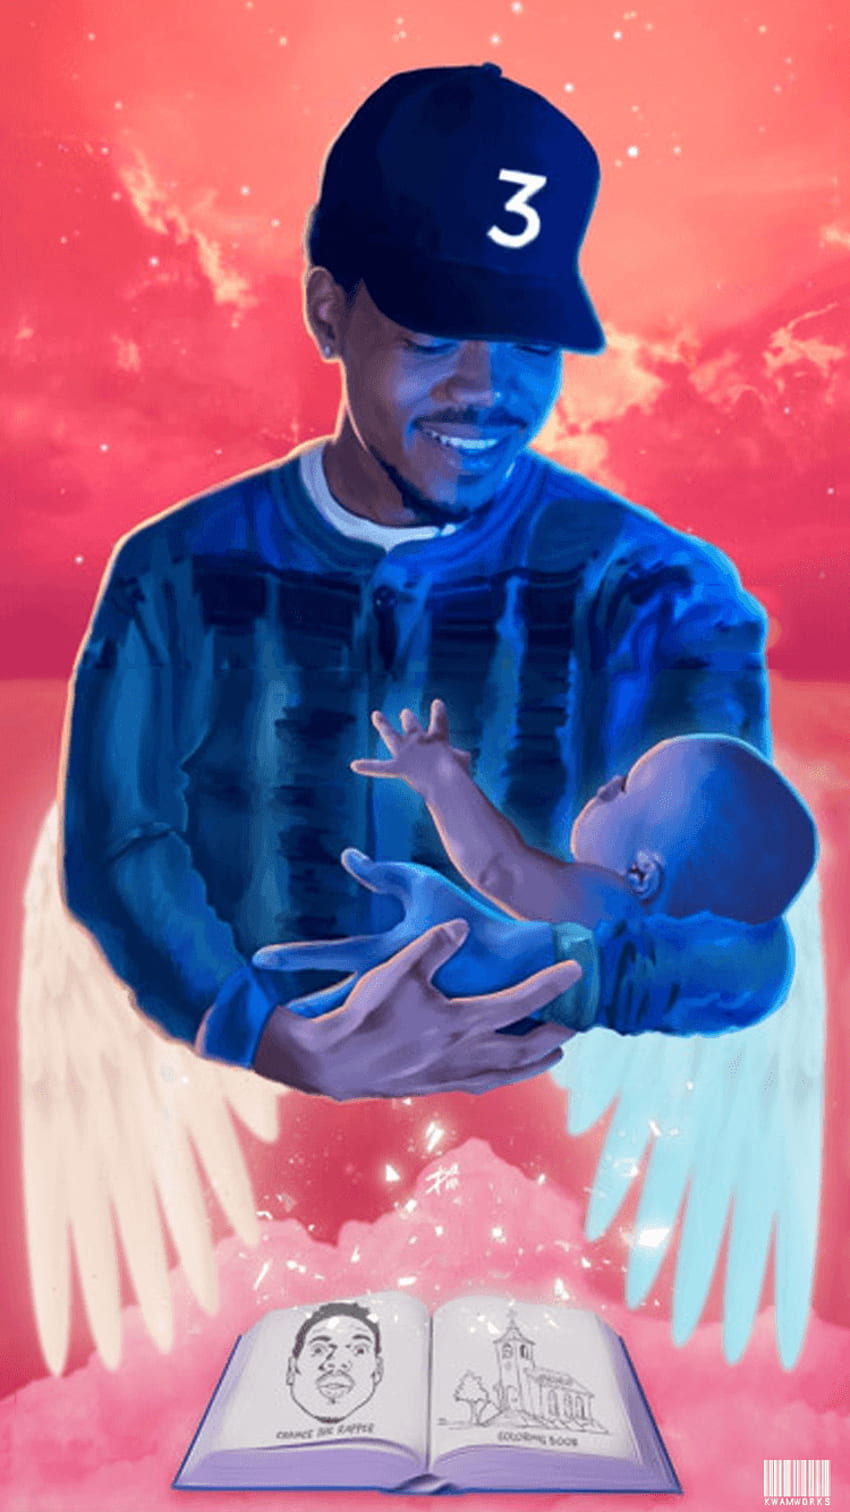 kwamworks design. Creative Album Covers And More, Chance the Rapper iPhone HD phone wallpaper